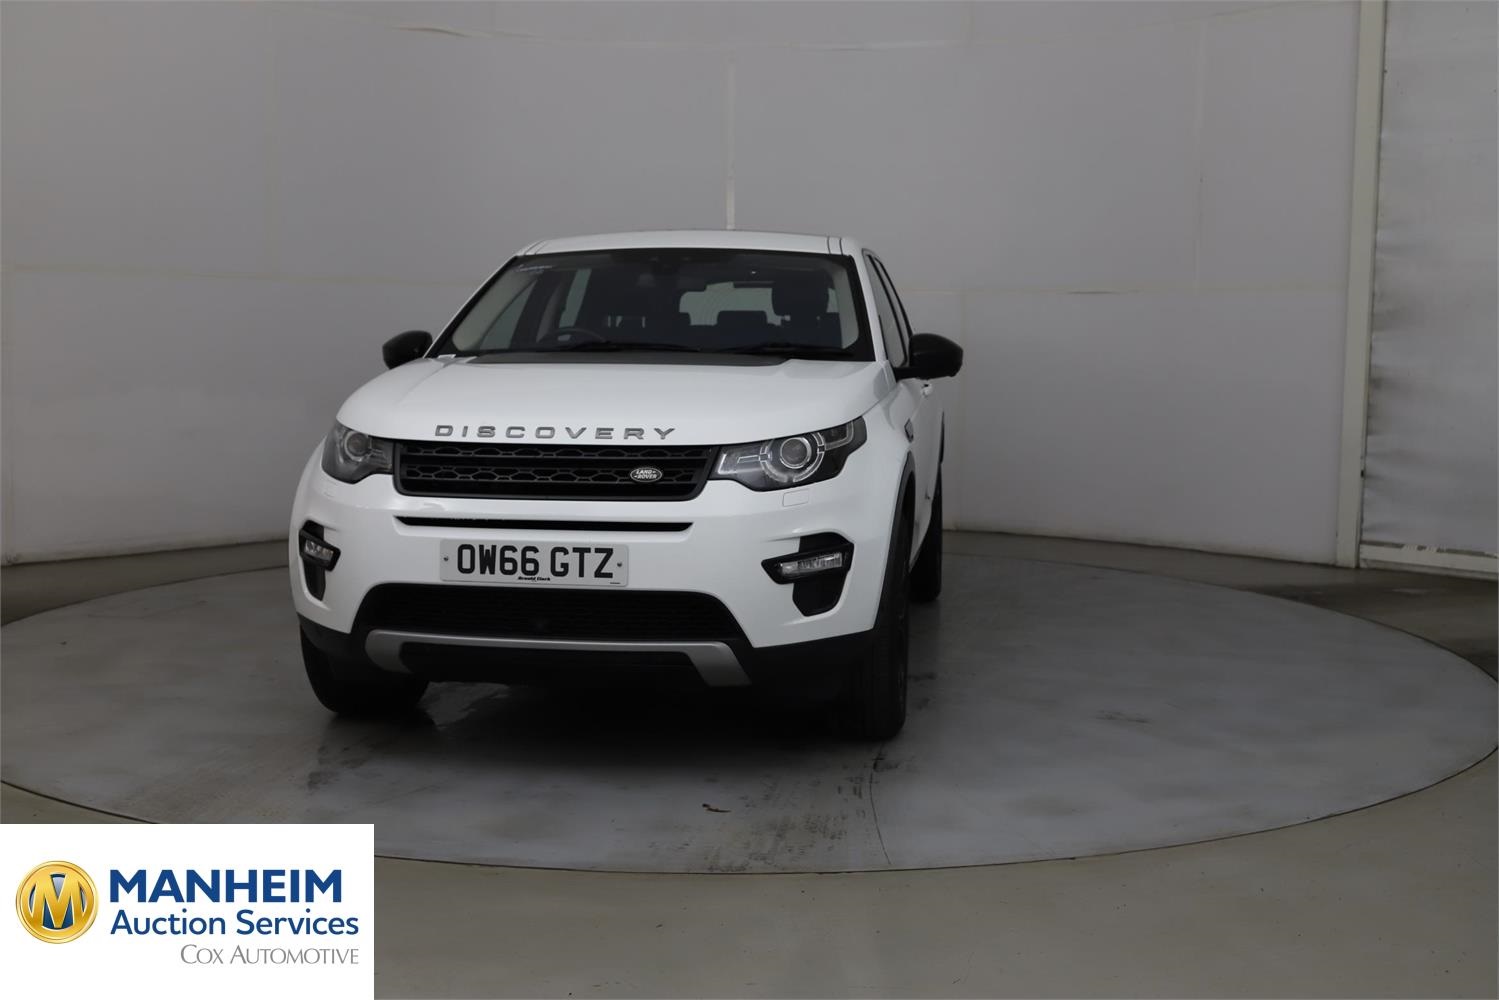 LAND ROVER
DISCOVERY SPORT
2.0 TD4 180 HSE 5dr Auto